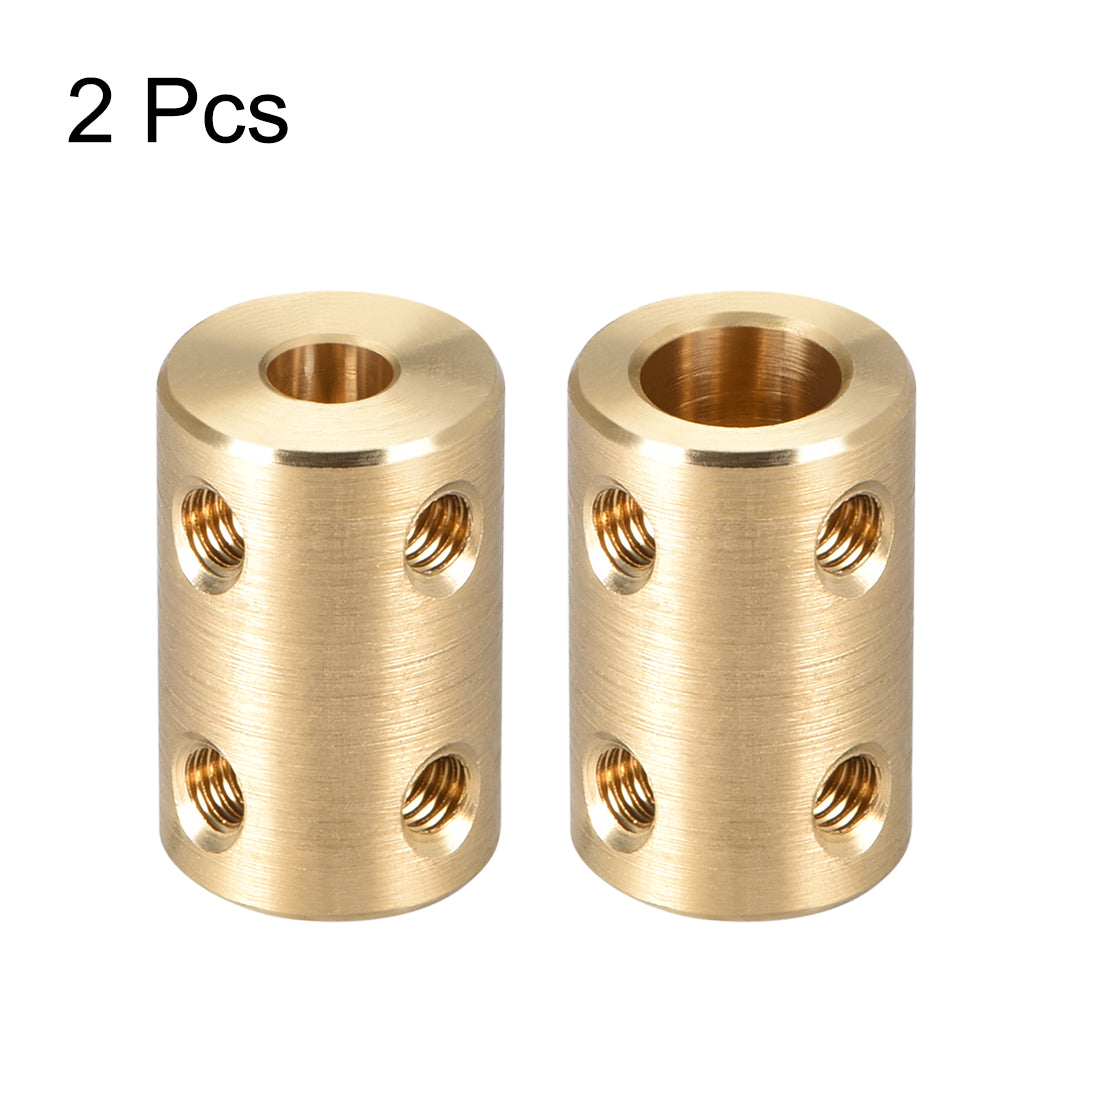 uxcell Uxcell Shaft Coupling 5mm to 8mm Bore L22xD14 Robot Motor Wheel Rigid Coupler Connector Gold Tone 2 Pcs